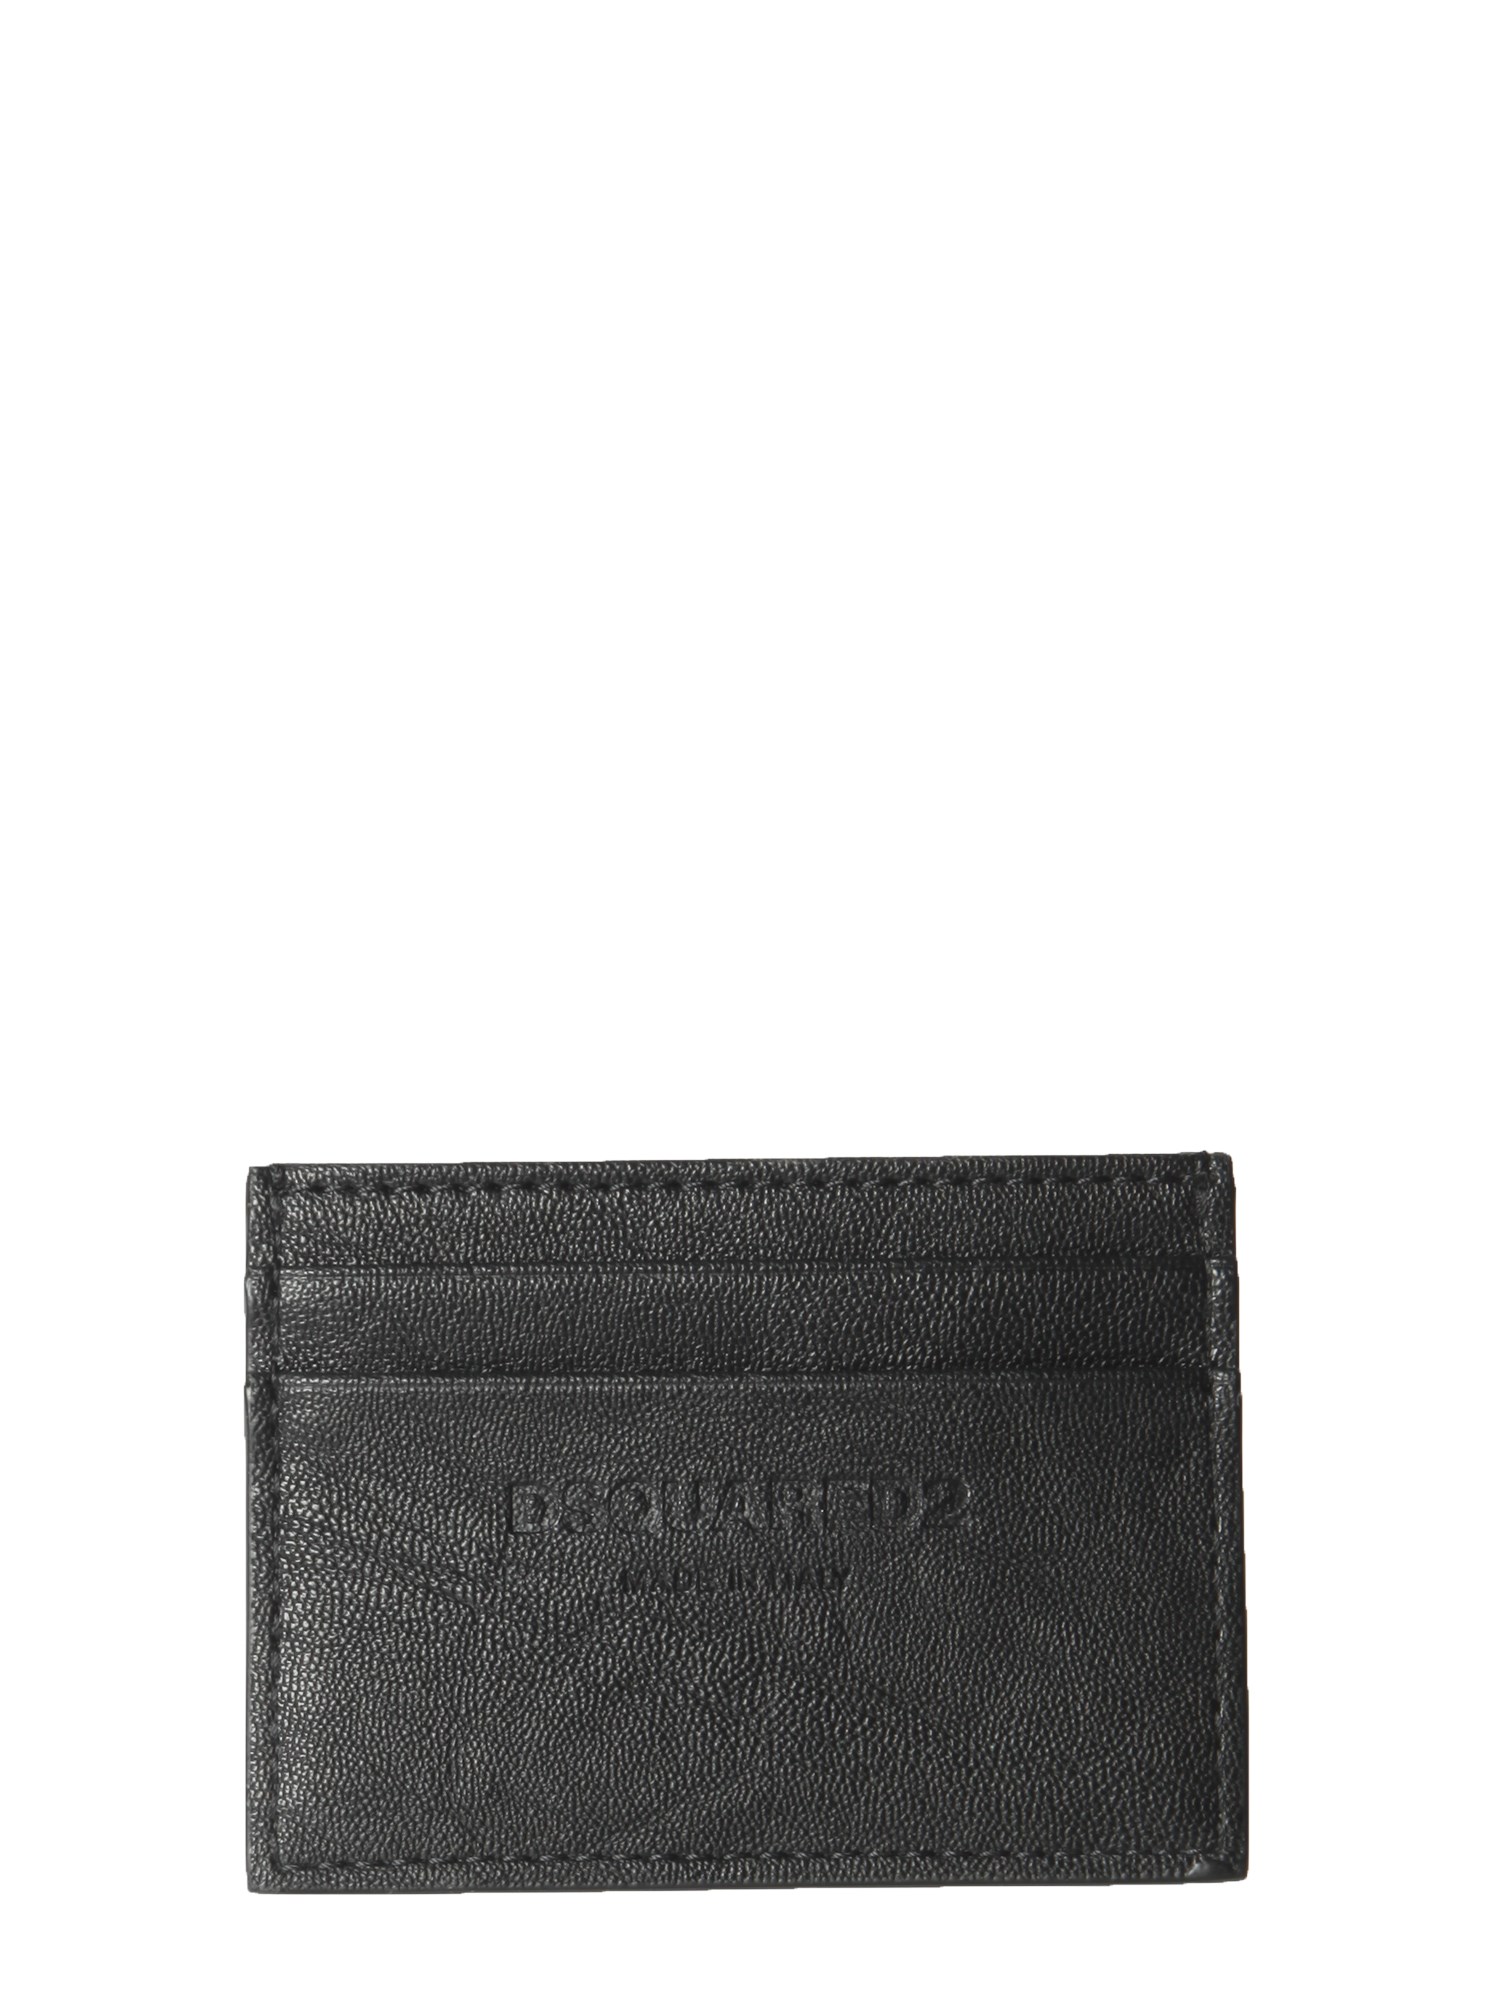 dsquared card holder with logo